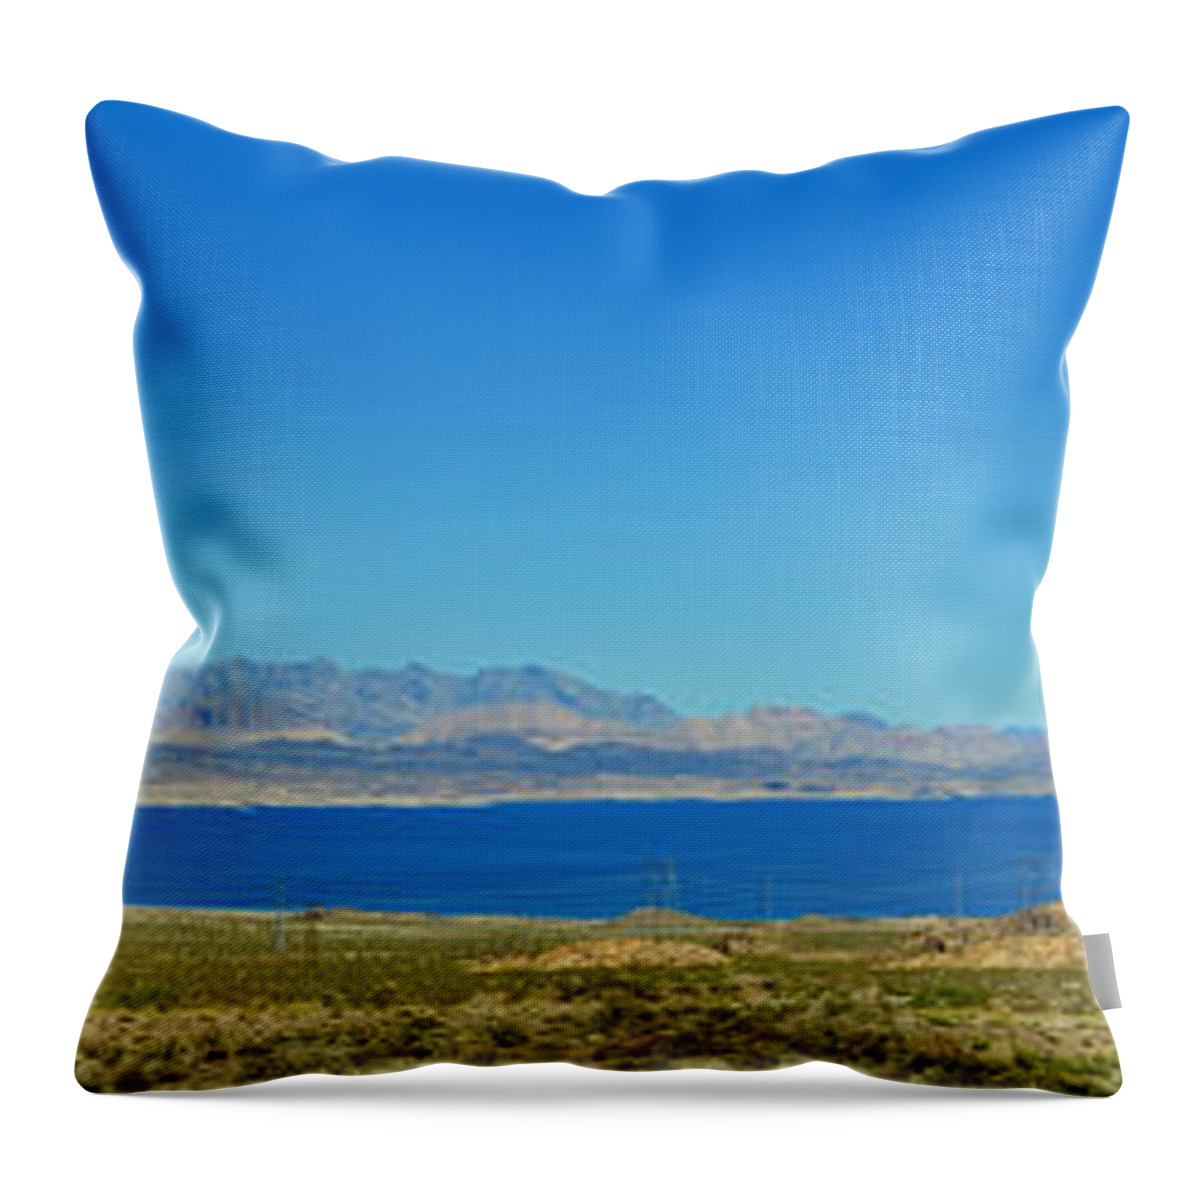 Lake Meade Throw Pillow featuring the photograph Lake Meade Nevada by Dejan Jovanovic